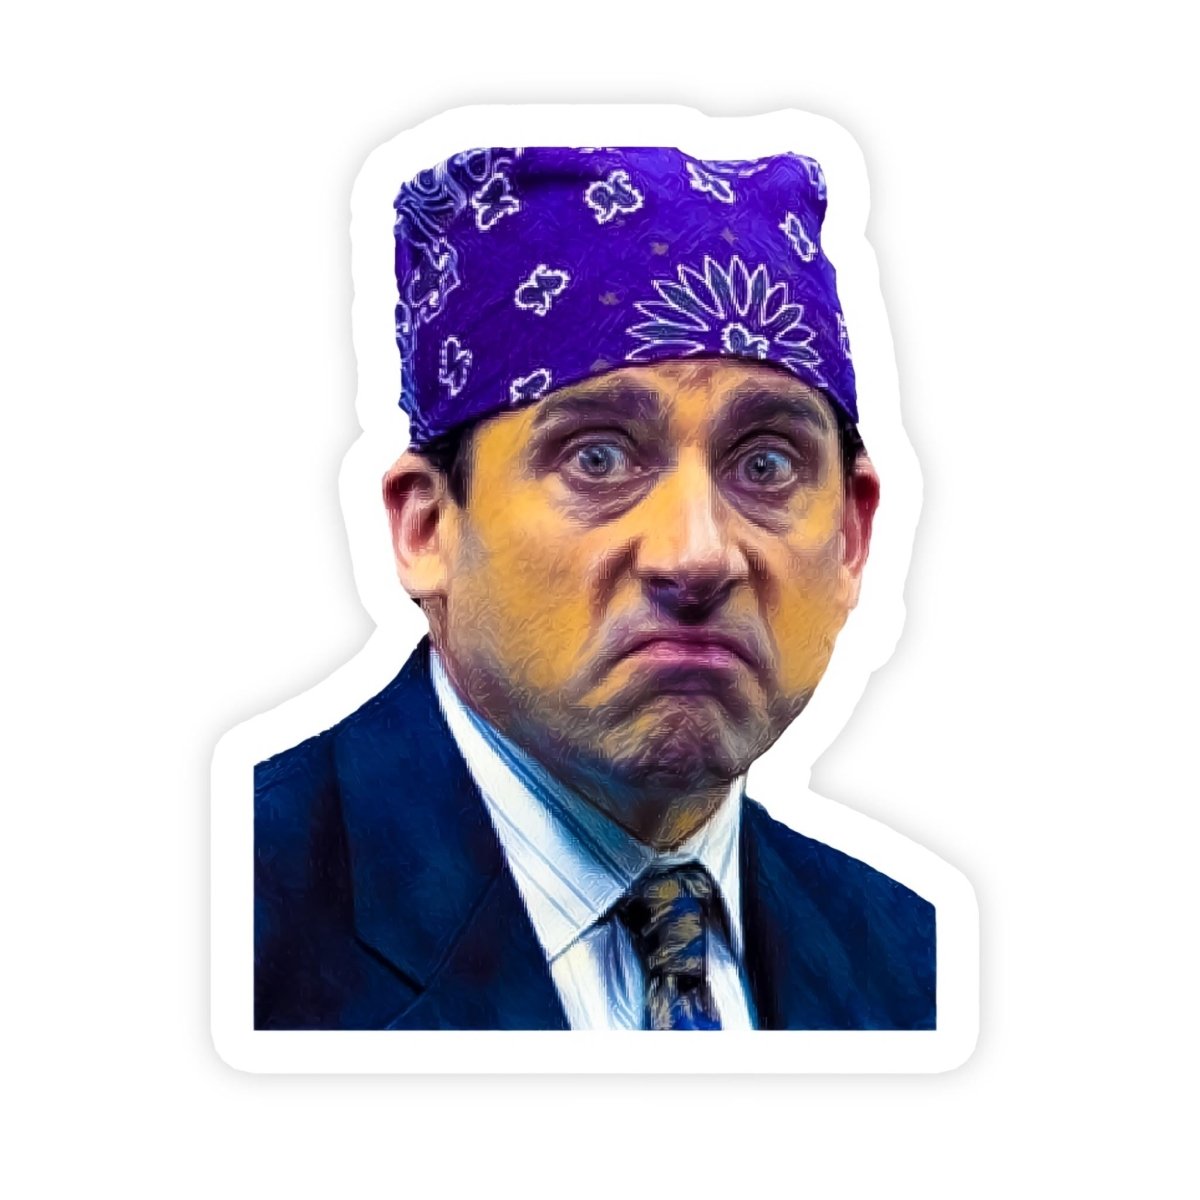 Prison Mike The Office Television Show Sticker - stickerbullPrison Mike The Office Television Show StickerRetail StickerstickerbullstickerbullTaylor_PrisonMike [#36]Prison Mike The Office Television Show Sticker